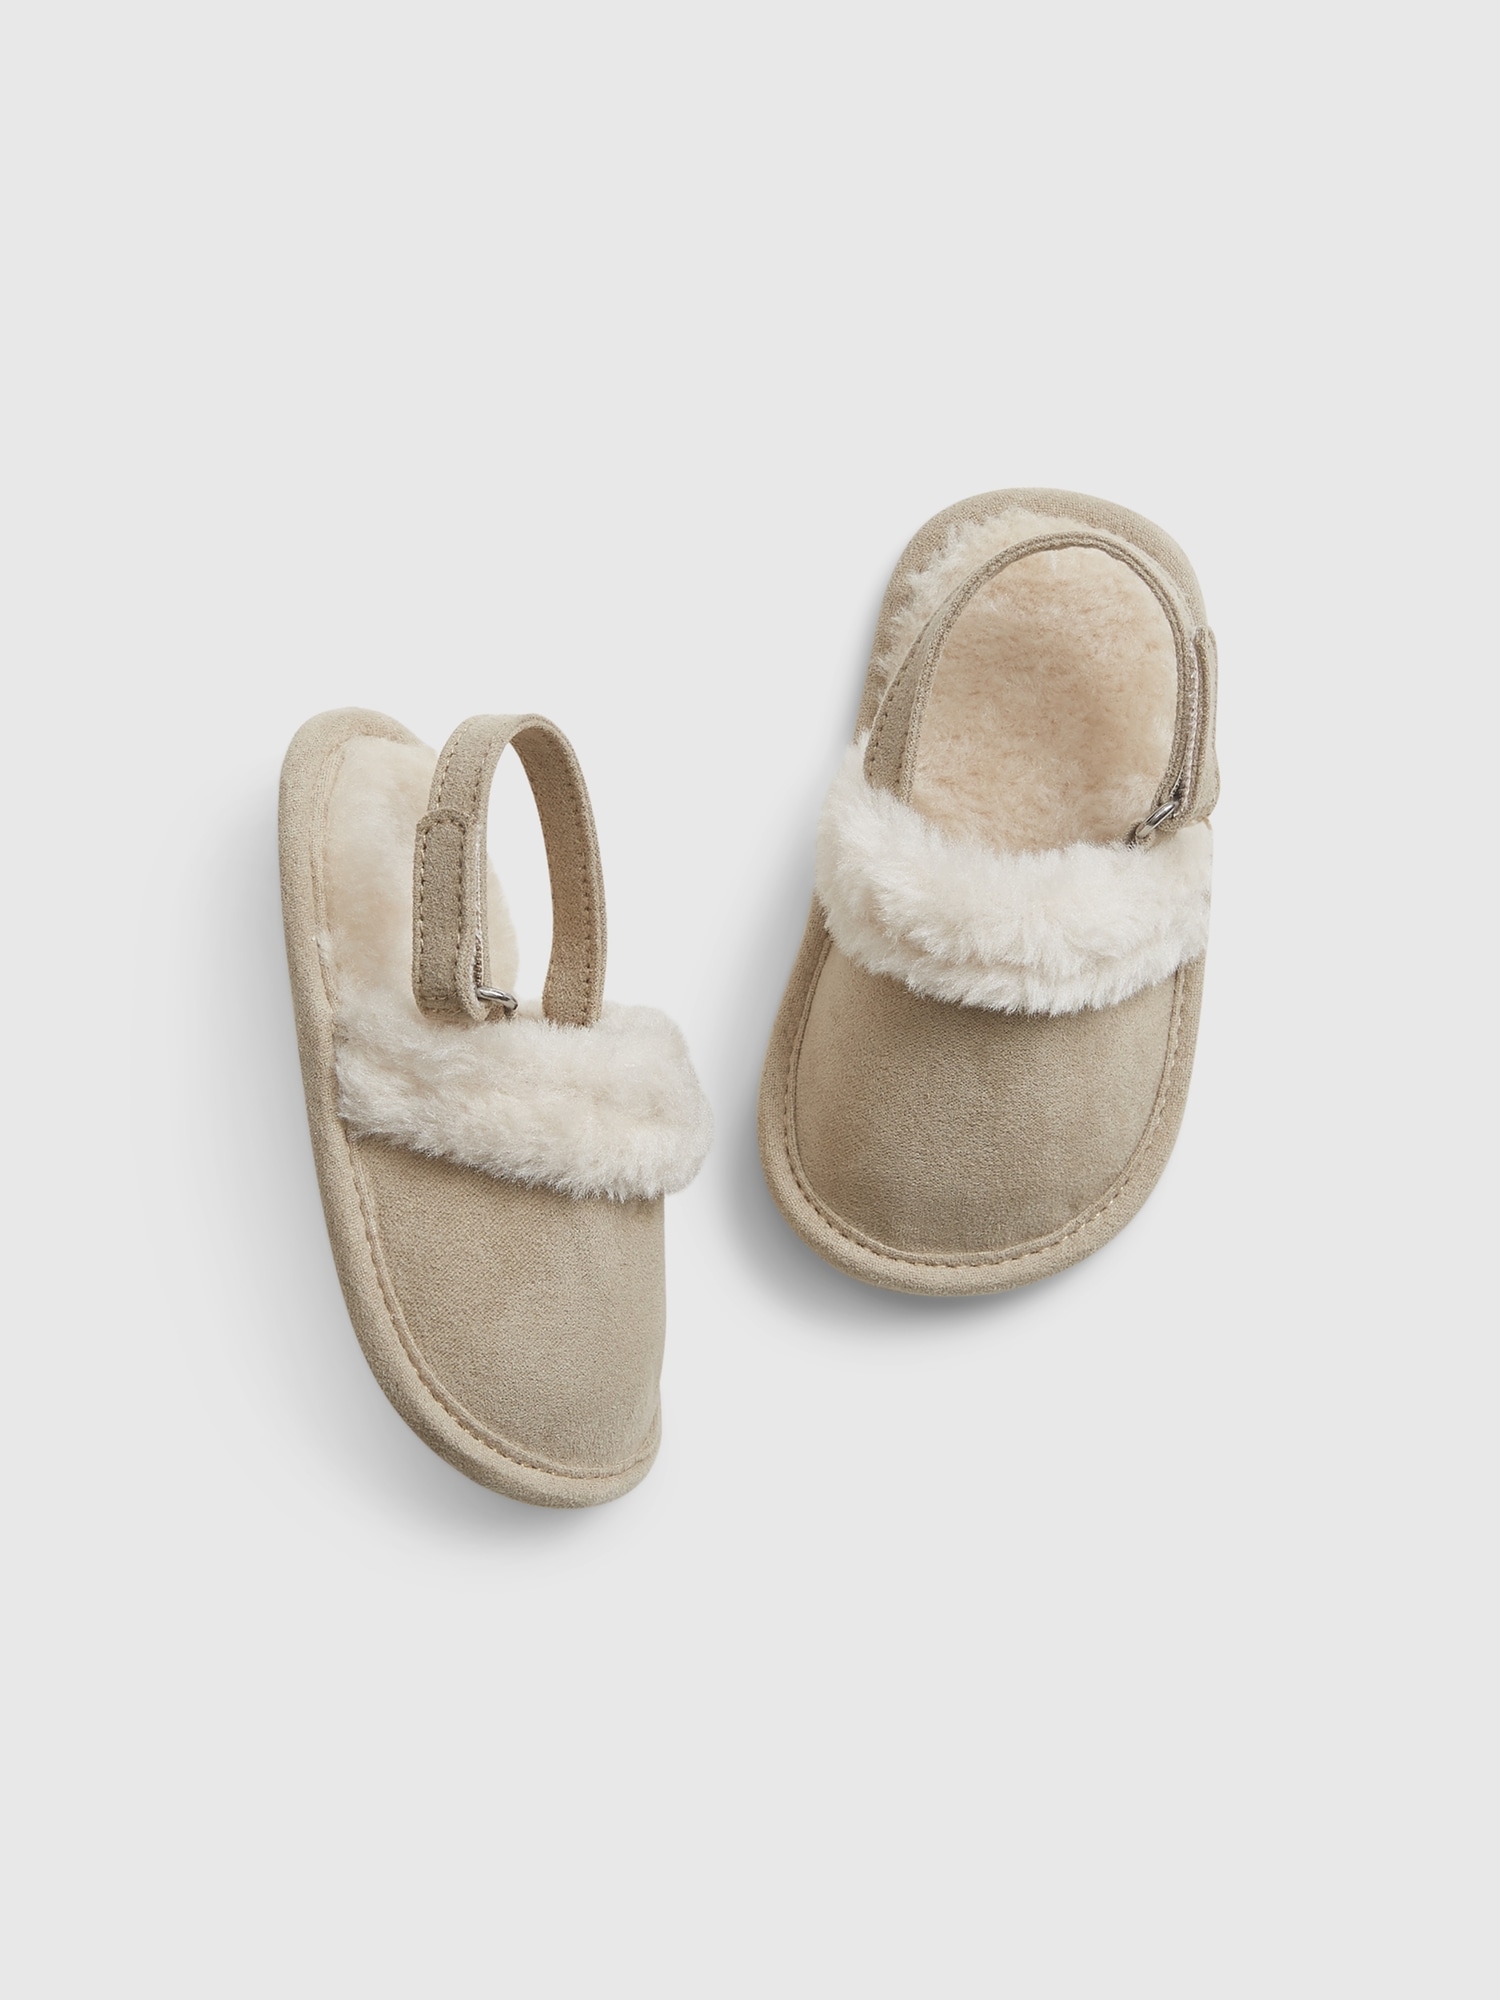 baby clogs